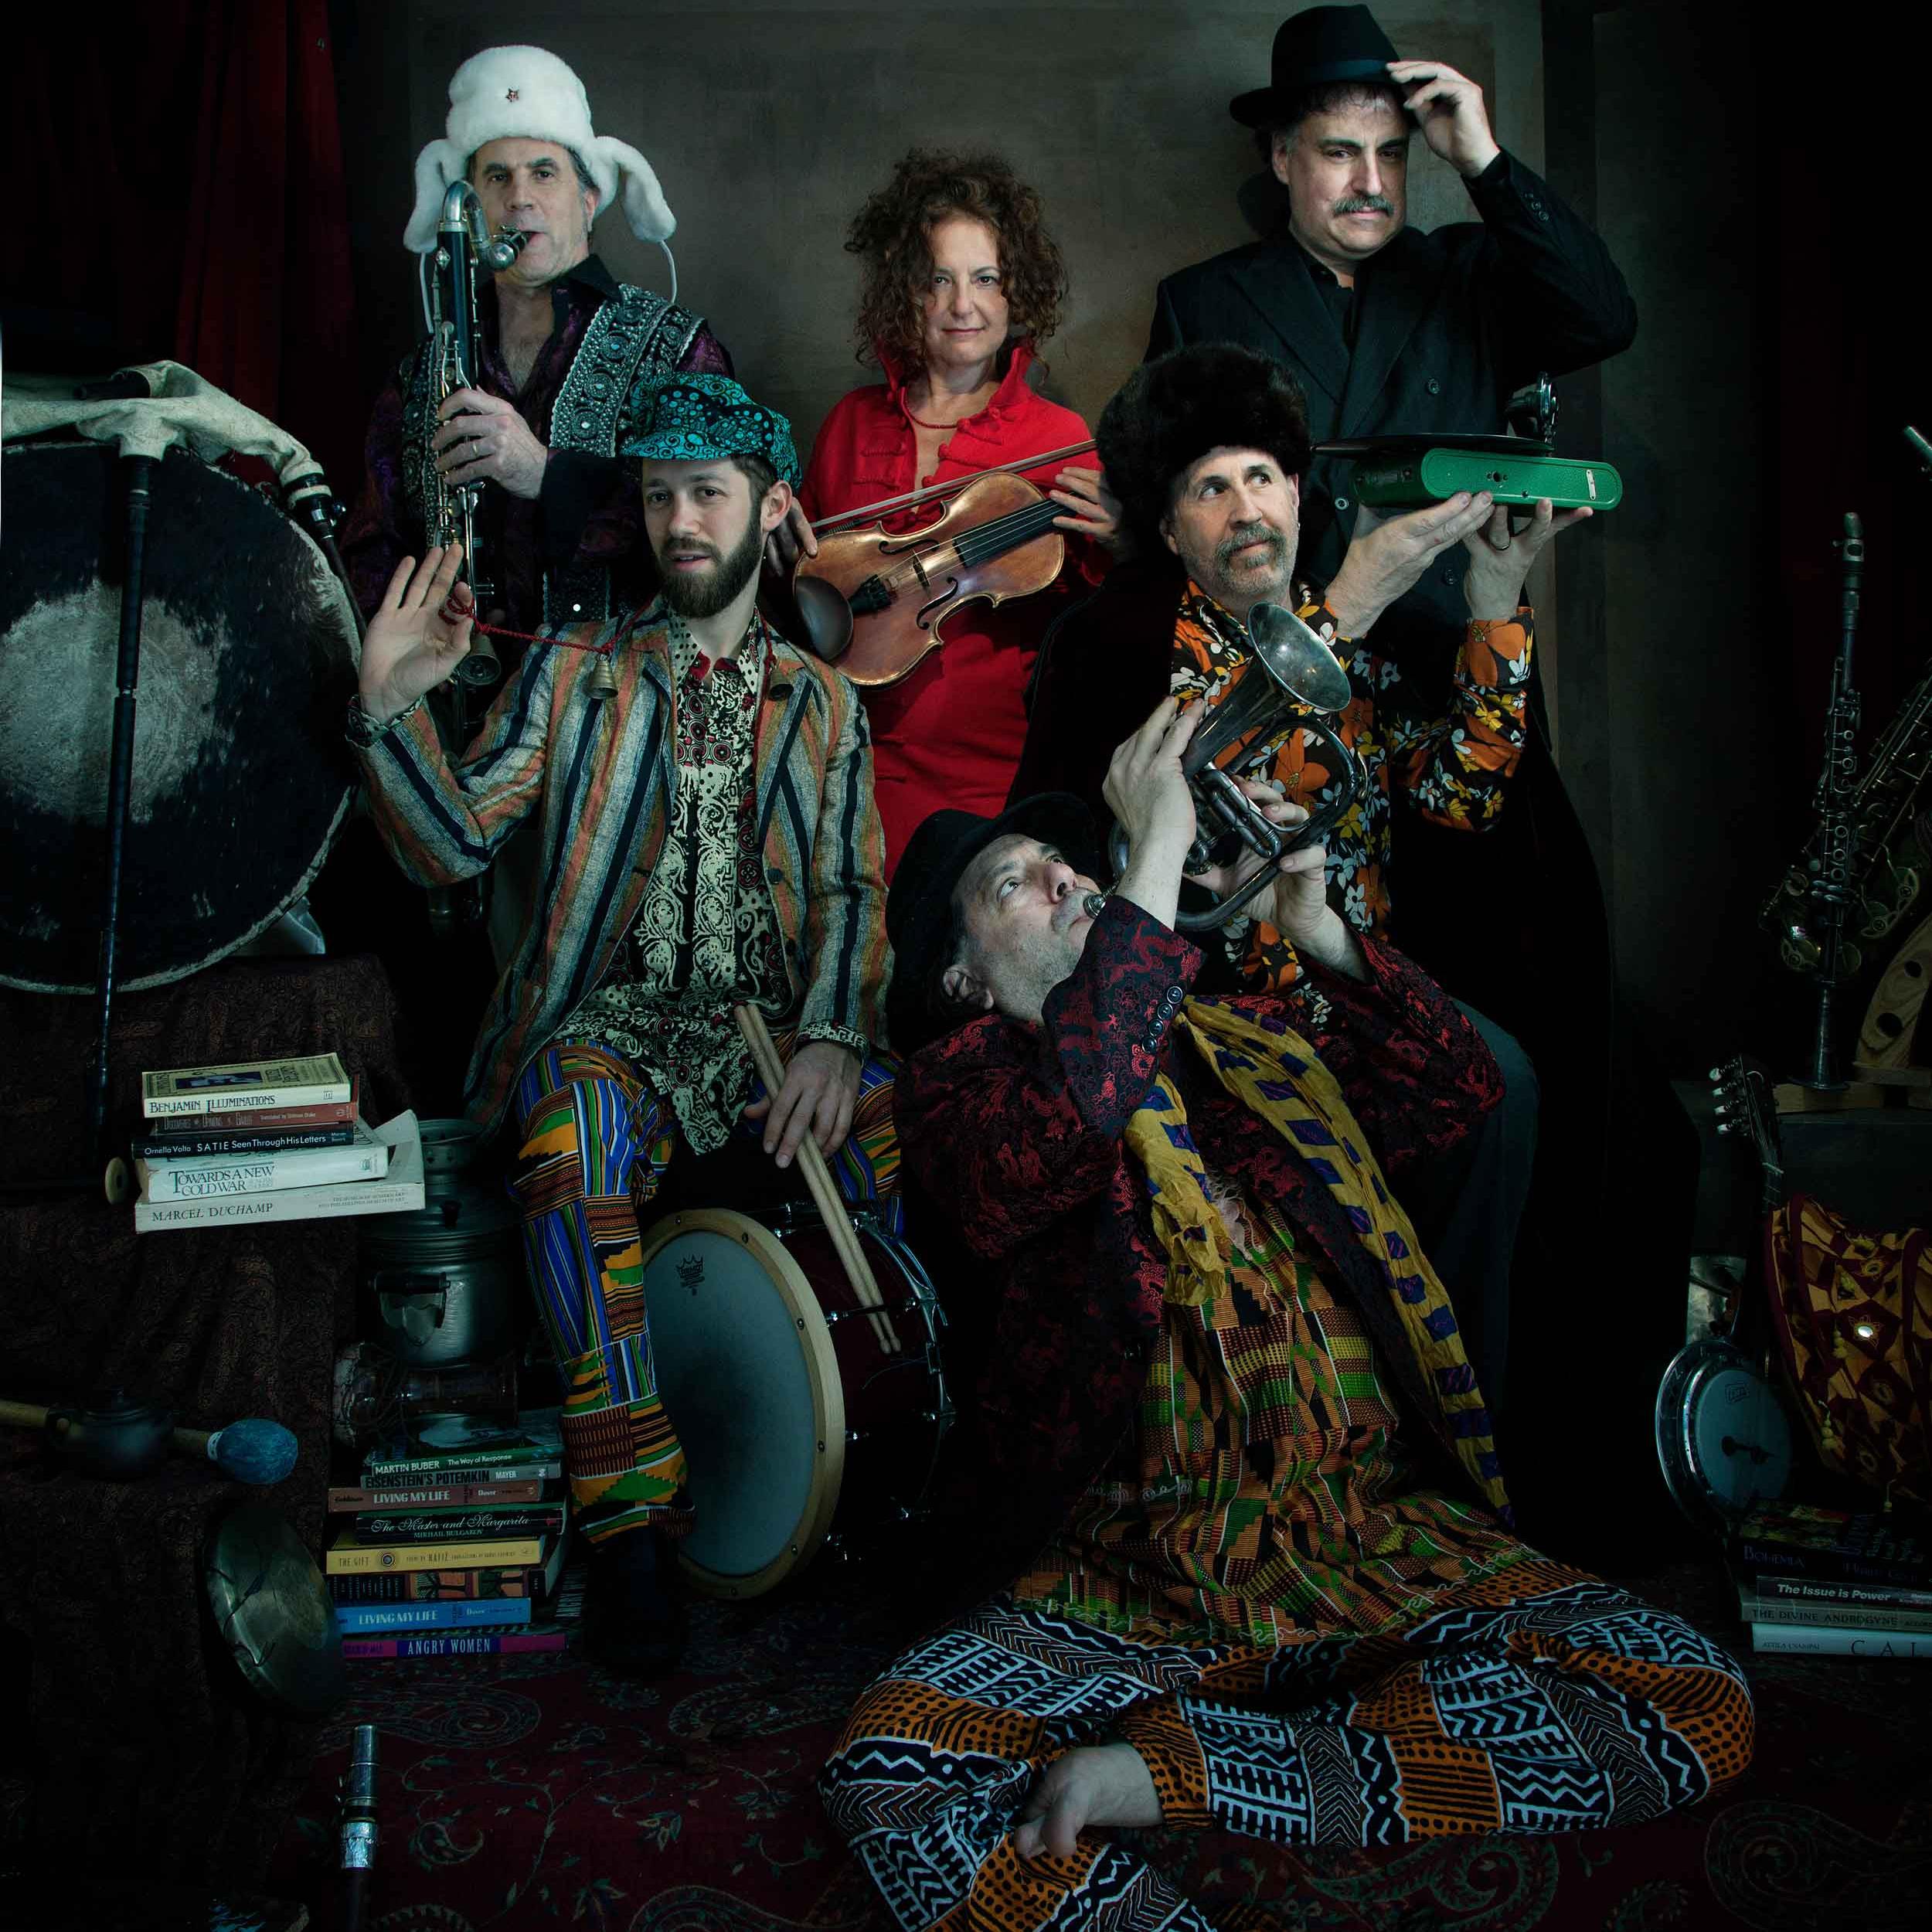 		Six people in colorful, odd clothing, holding and playing musical instruments including fiddle, trumpet and saxophone
	